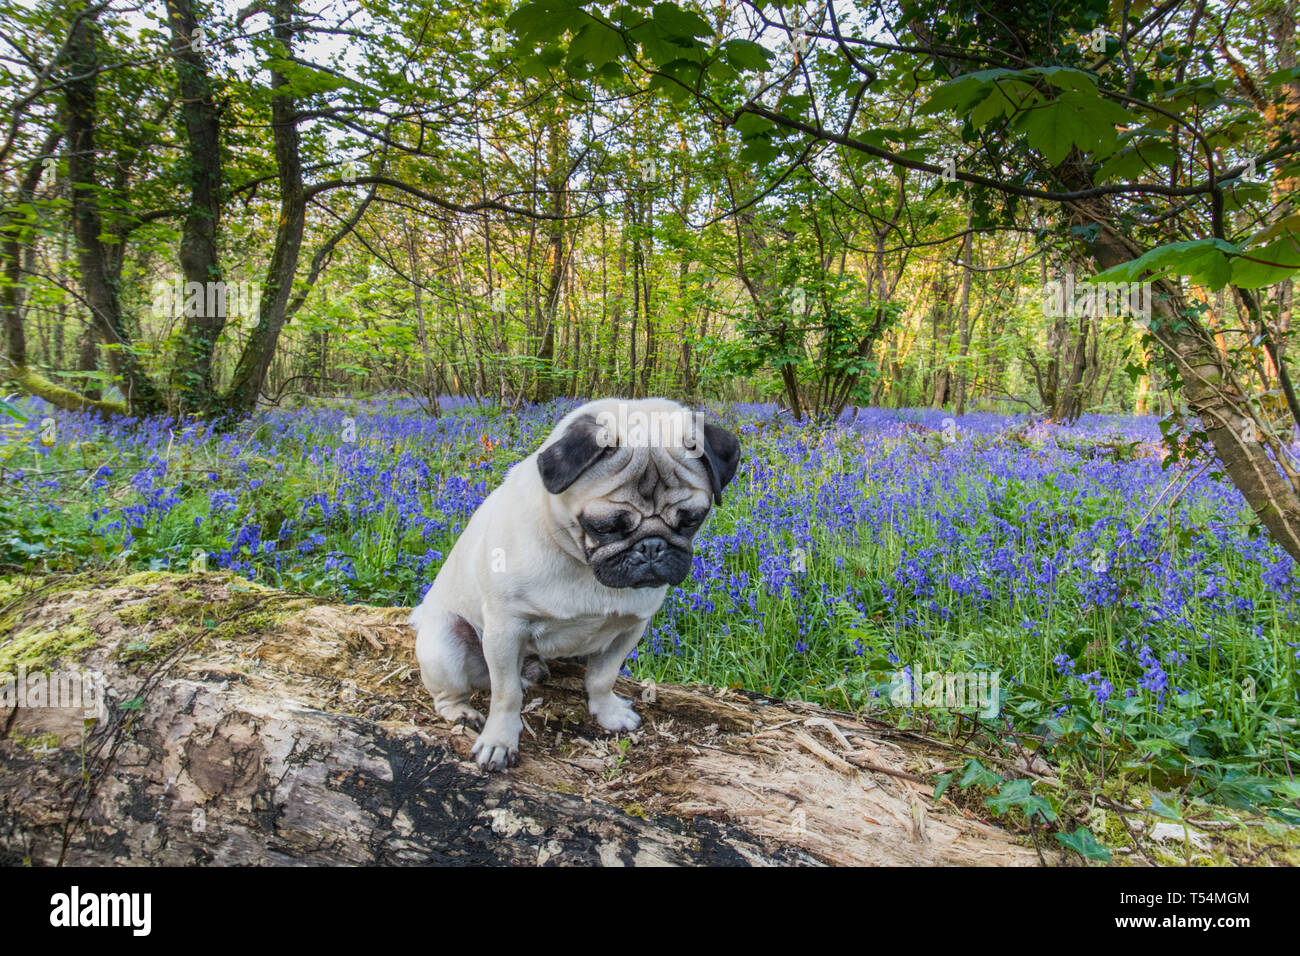 Titan the Pug sitting on a log in a bluebell wood in full bloom Stock Photo